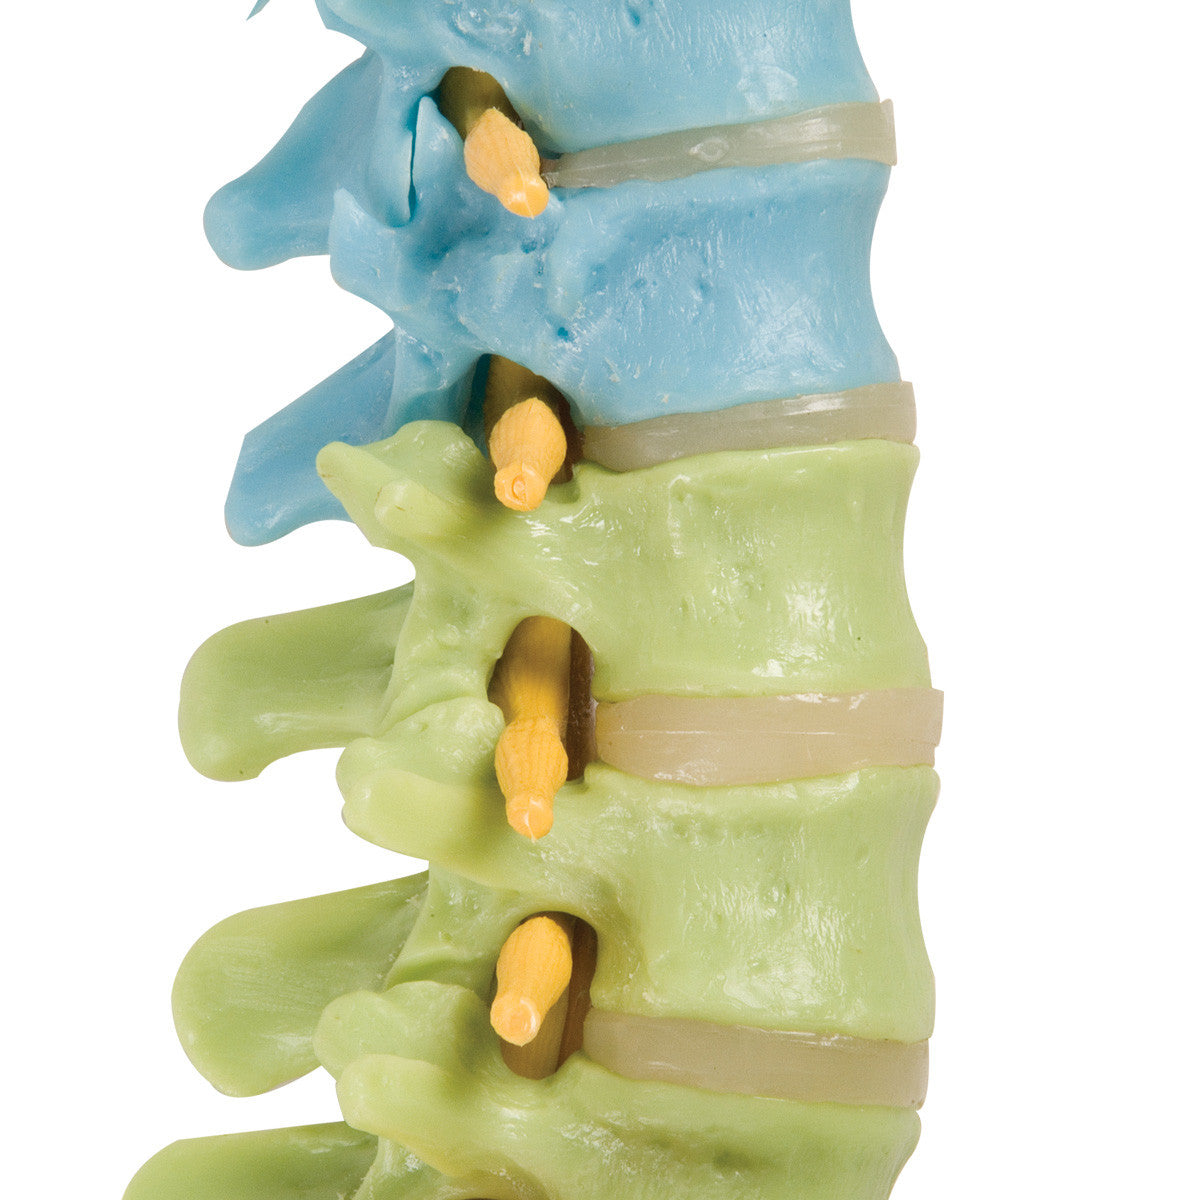 Didactic Flexible Spine with Femur Heads - lateral view of vertebrae